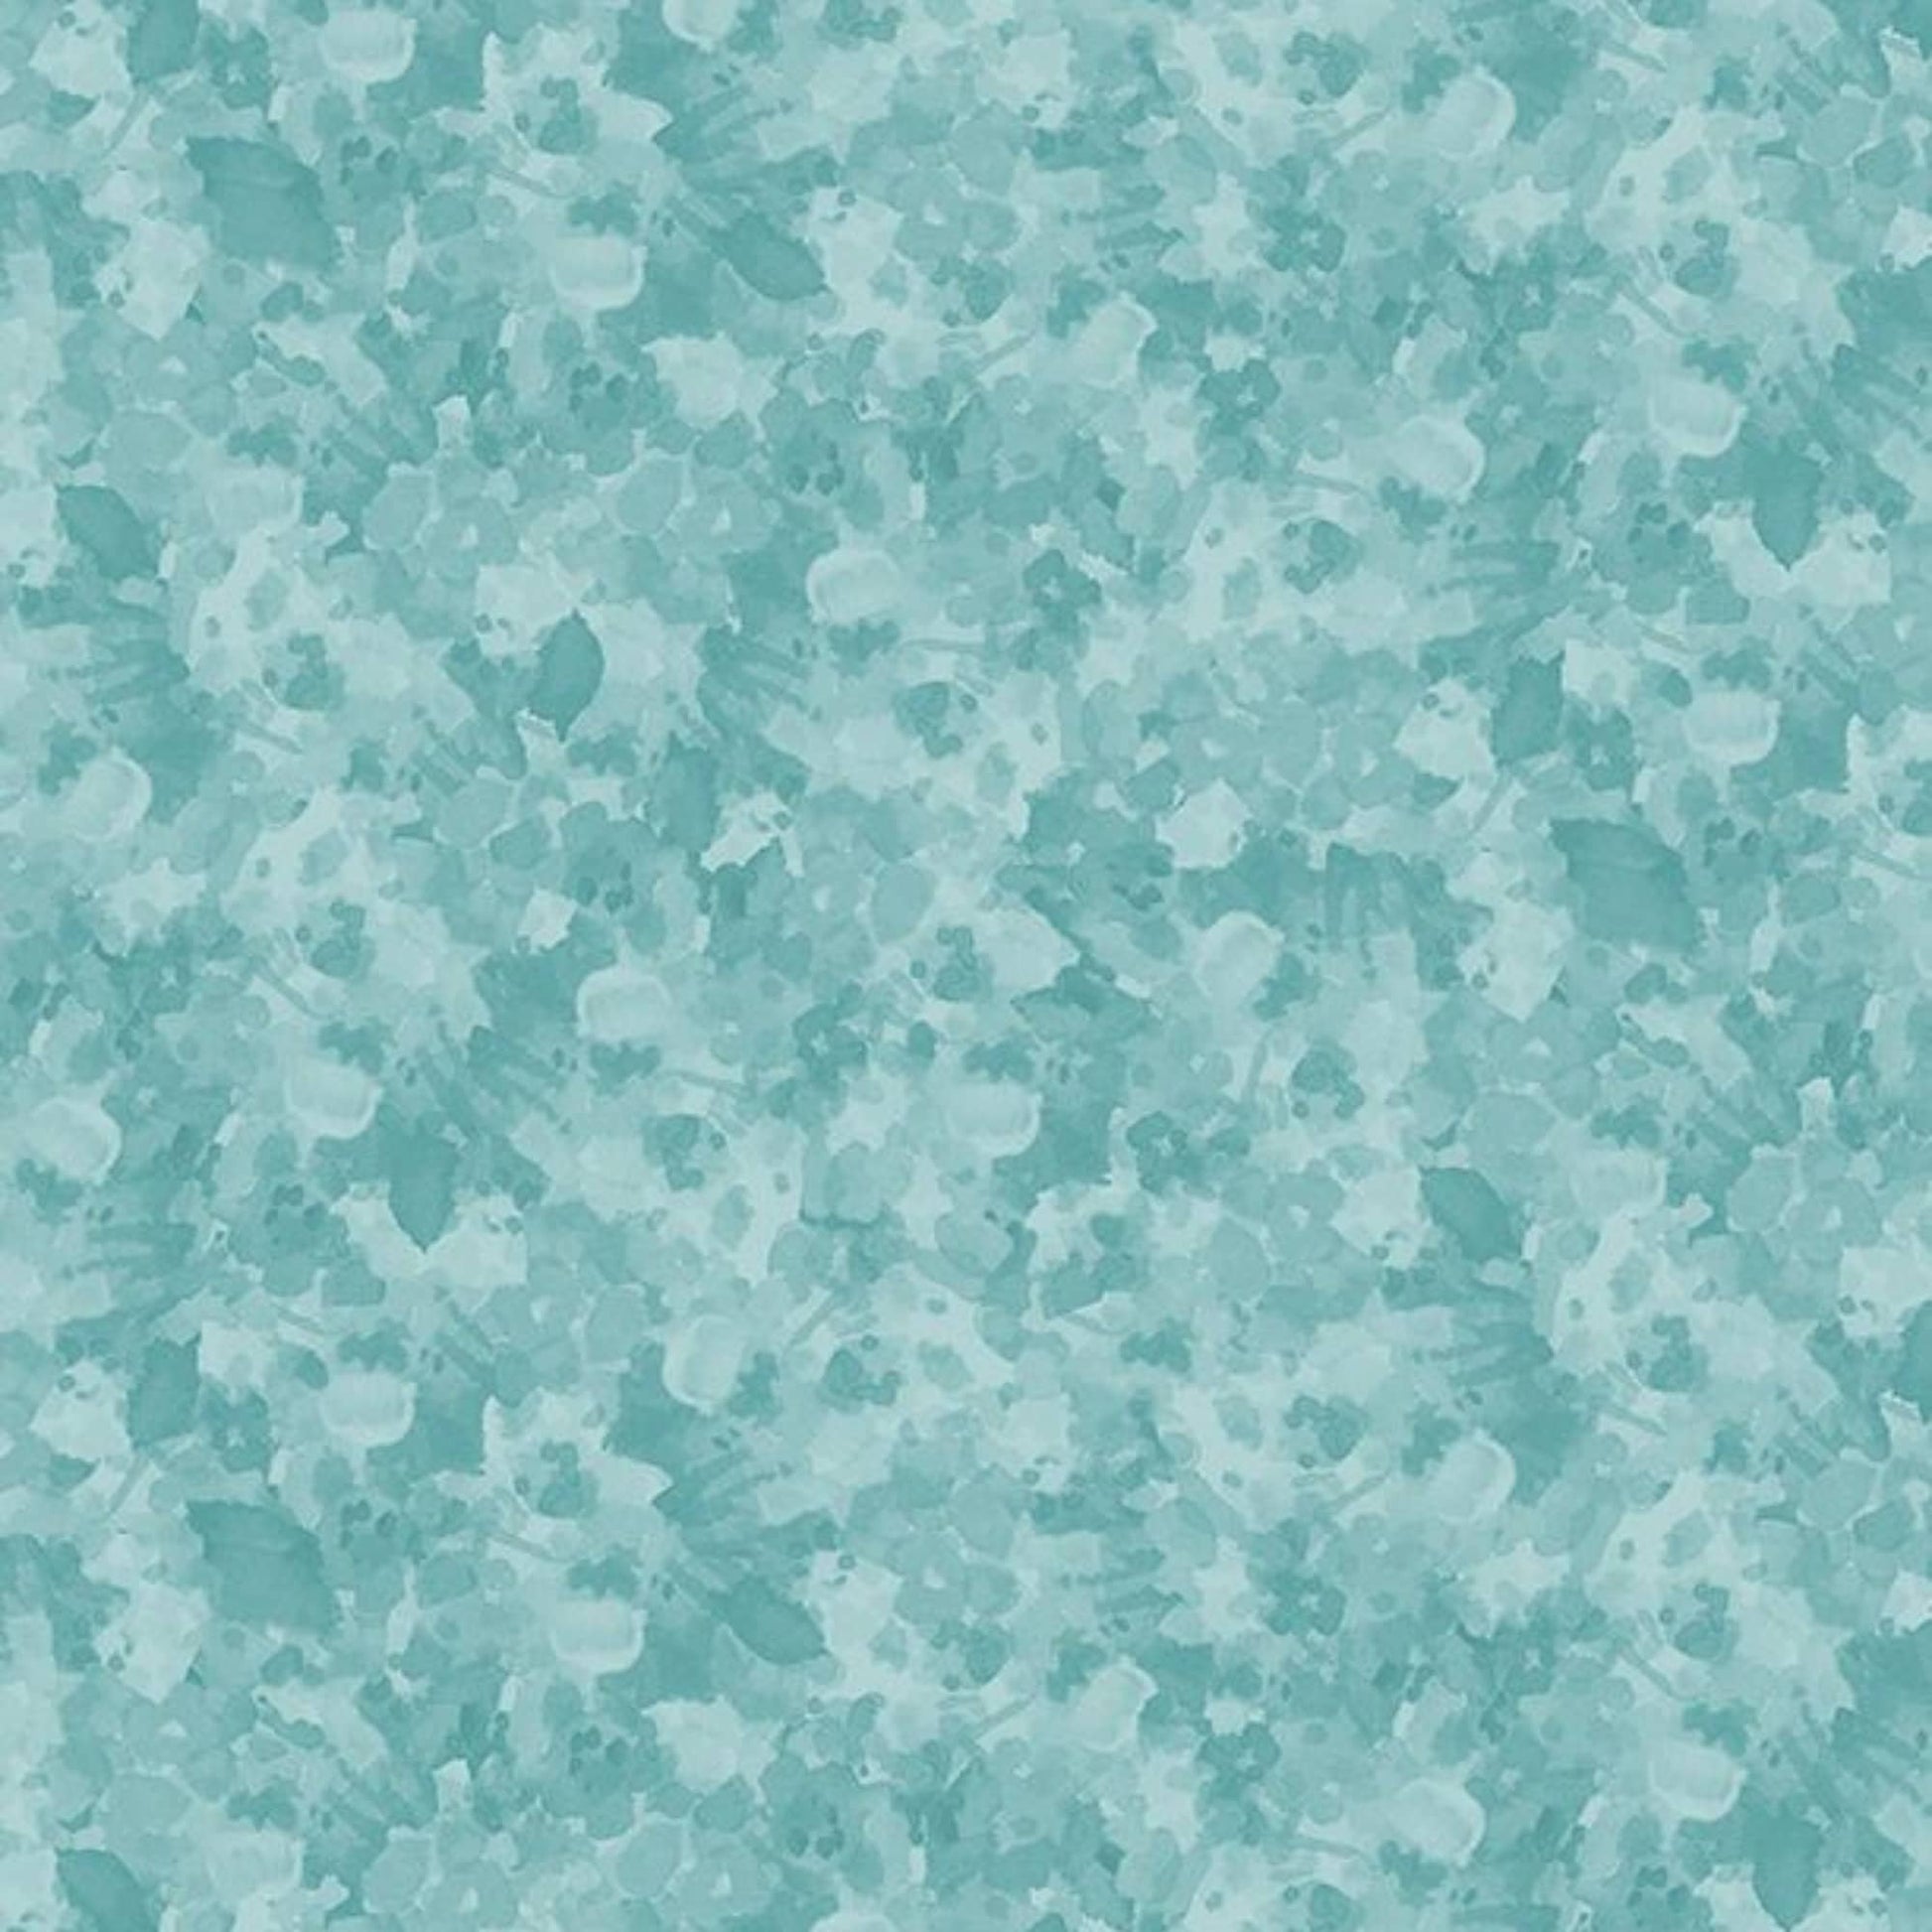 Wilmington Prints leaf texture teal / FQ (18"x21") Light Teal Gingham, Leaf Texture Teal or Repeating Stripe Fabric by the Yard from Wilmington Prints Sunflower Sweet by Lisa Audit